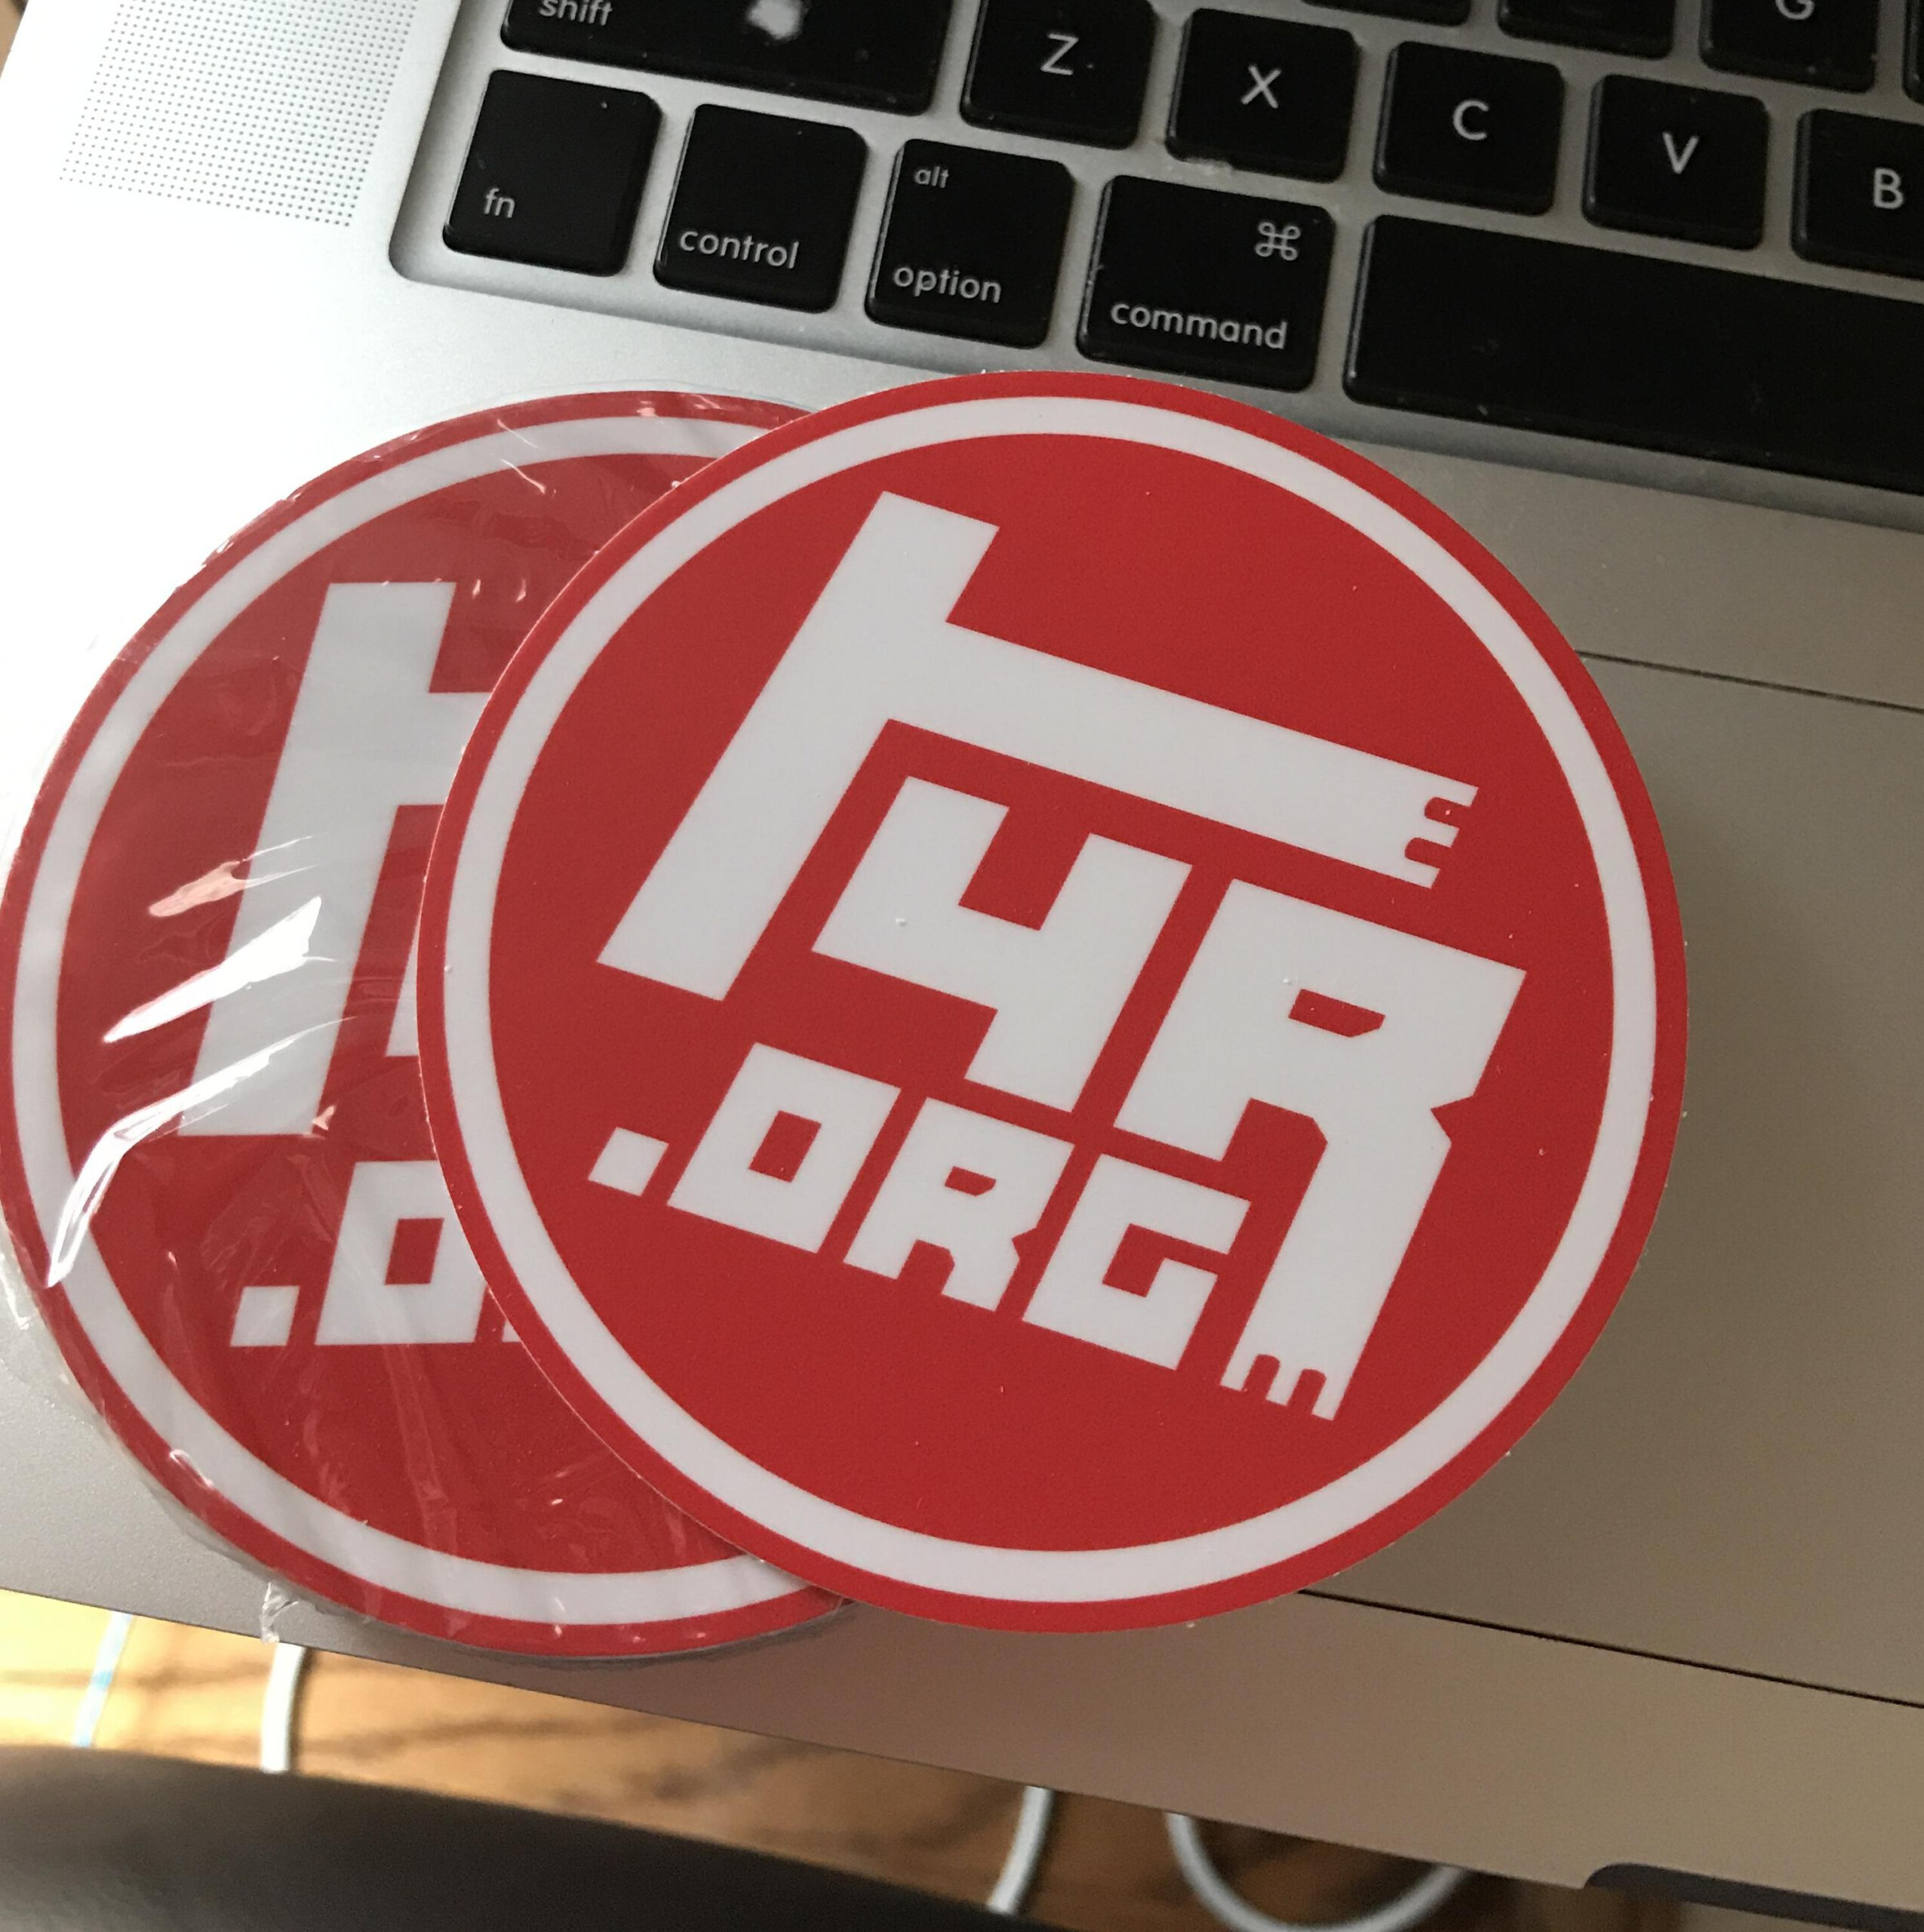 Order Your T4R ORG Decals Here Toyota 4Runner Forum Largest